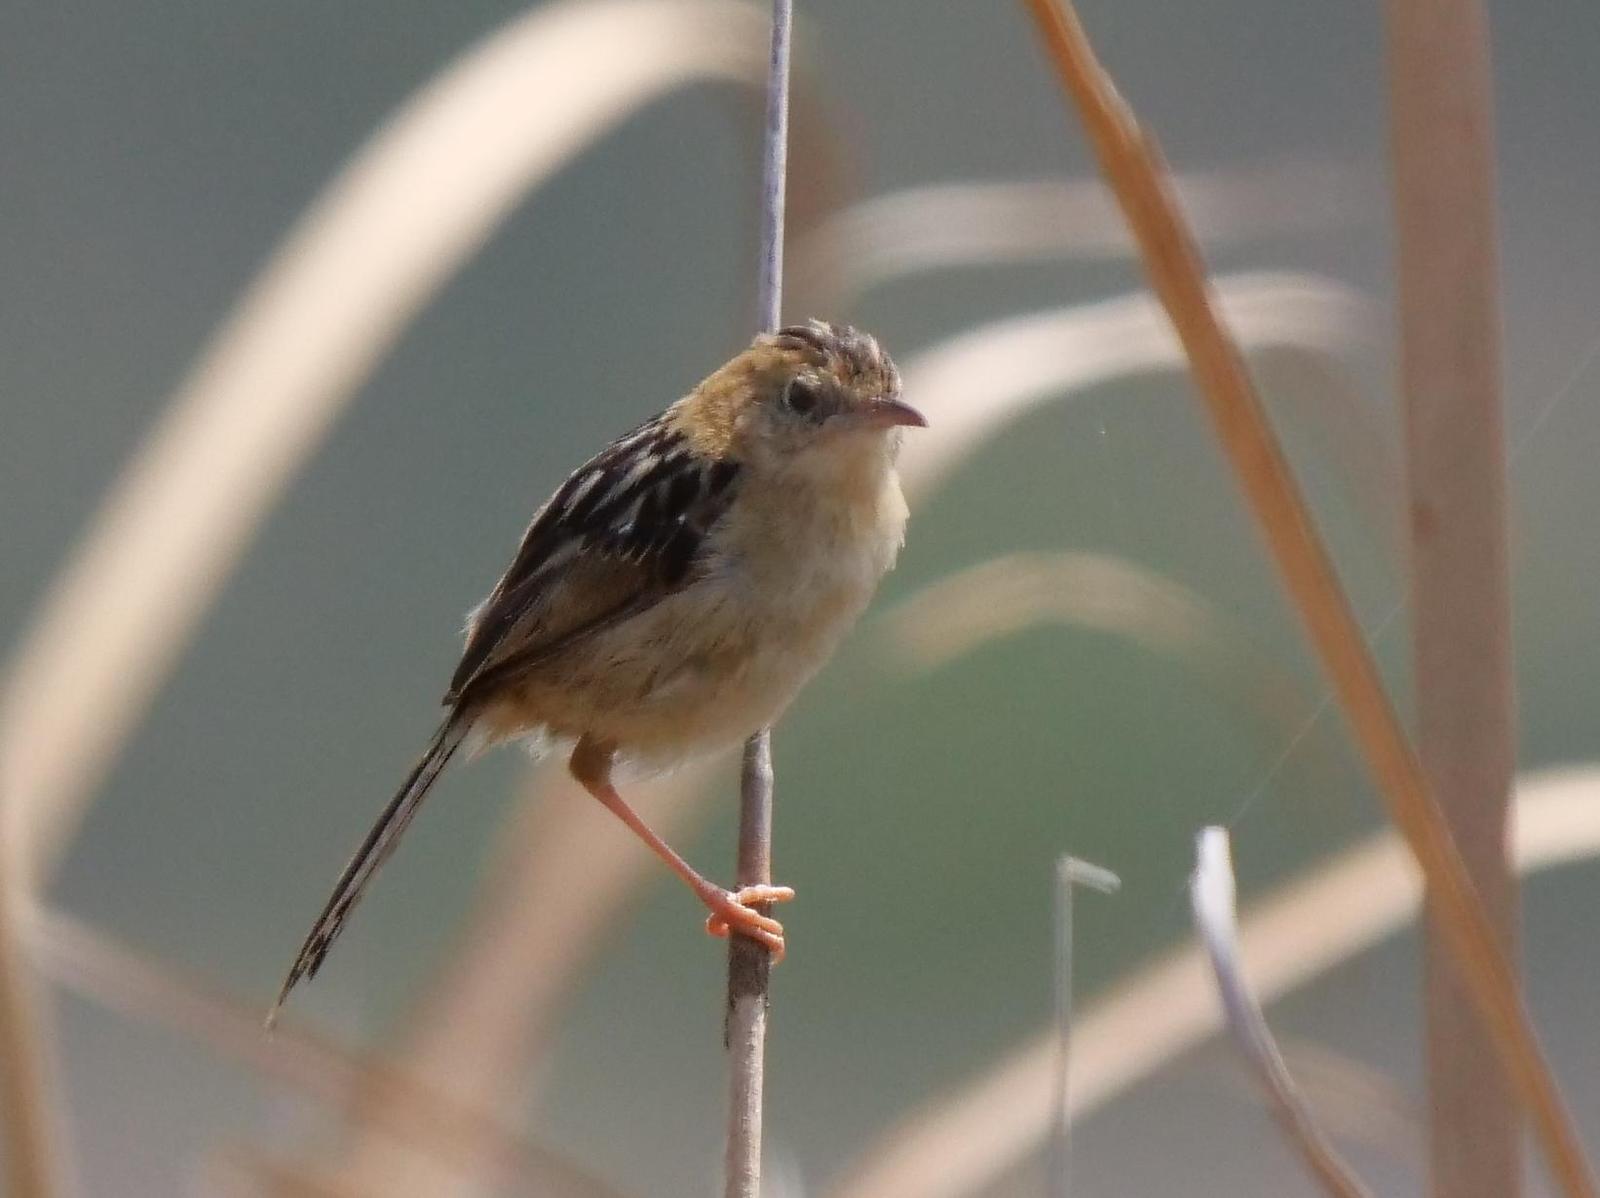 Golden-headed Cisticola Photo by Peter Lowe